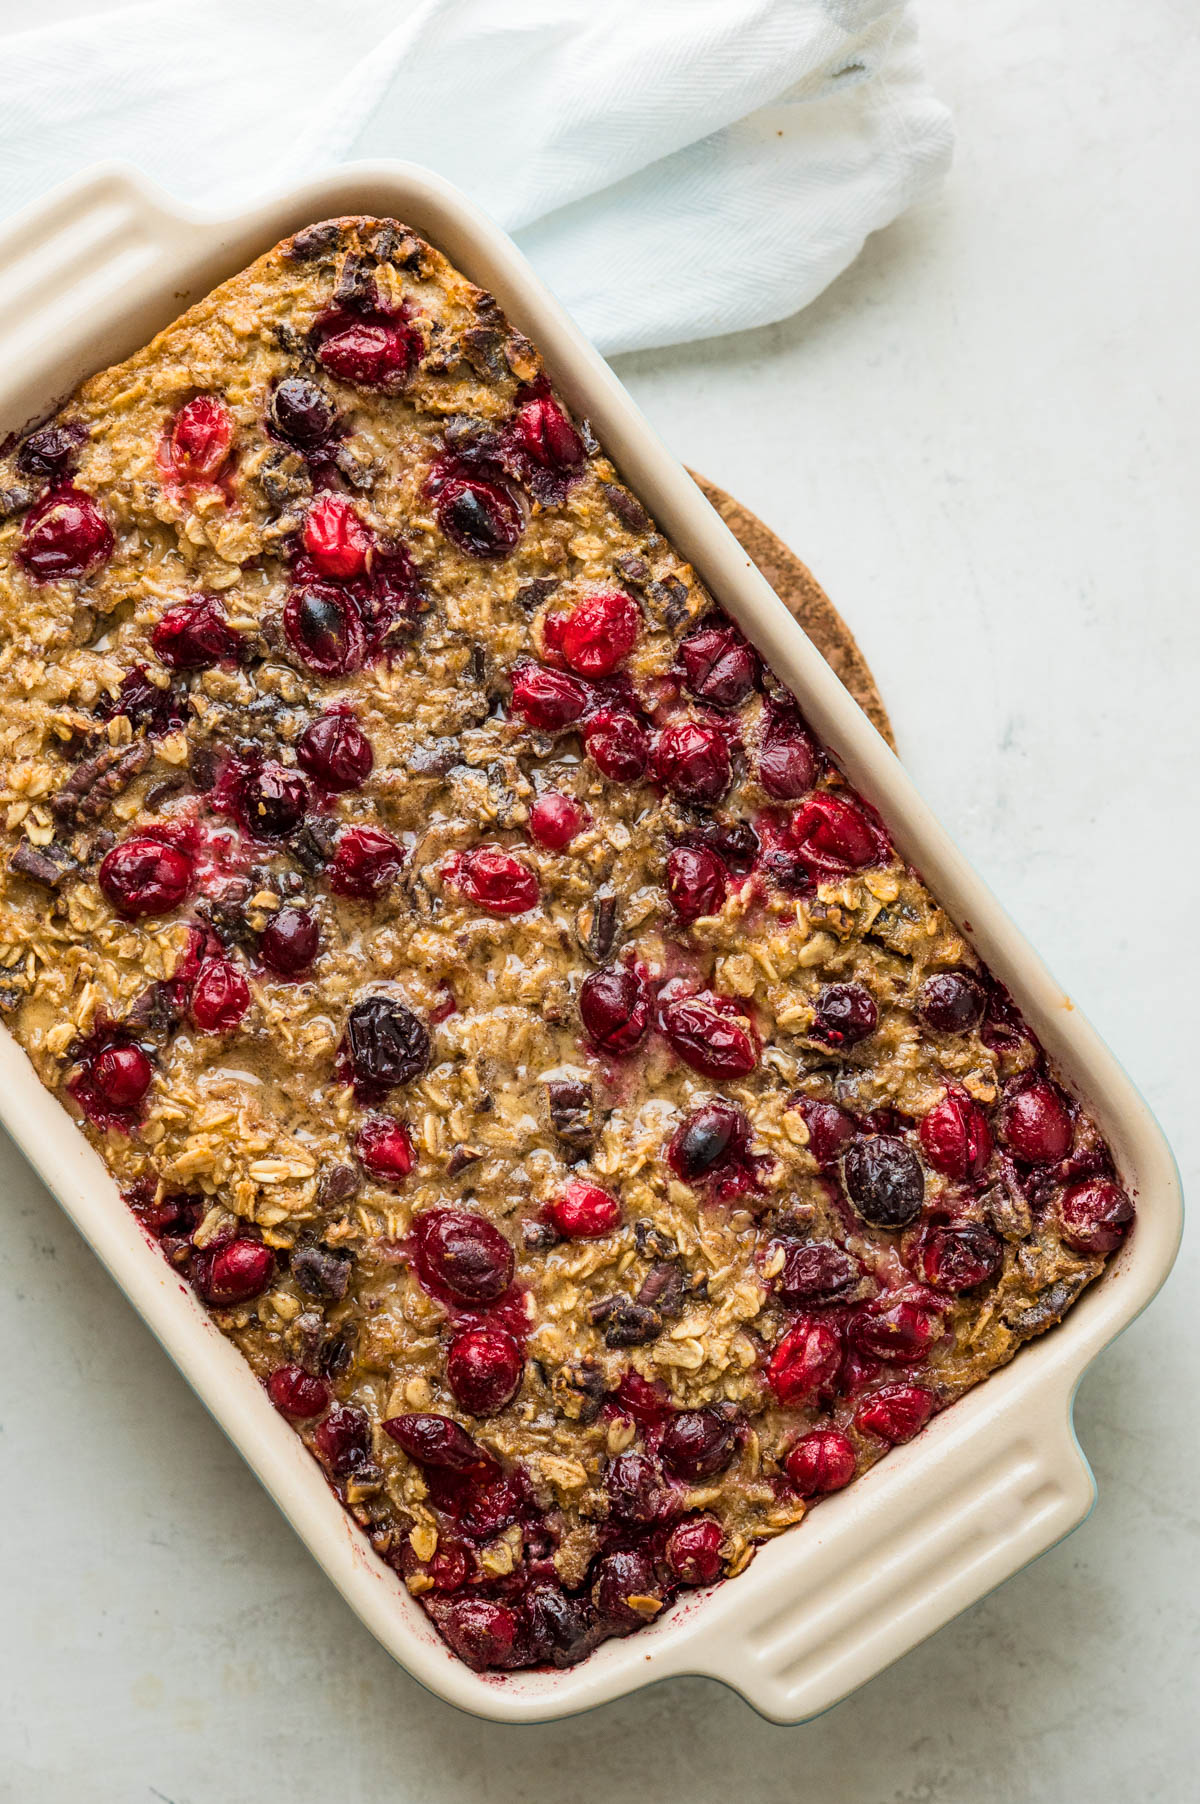 the banana baked oatmeal with cranberries, hot from the oven.